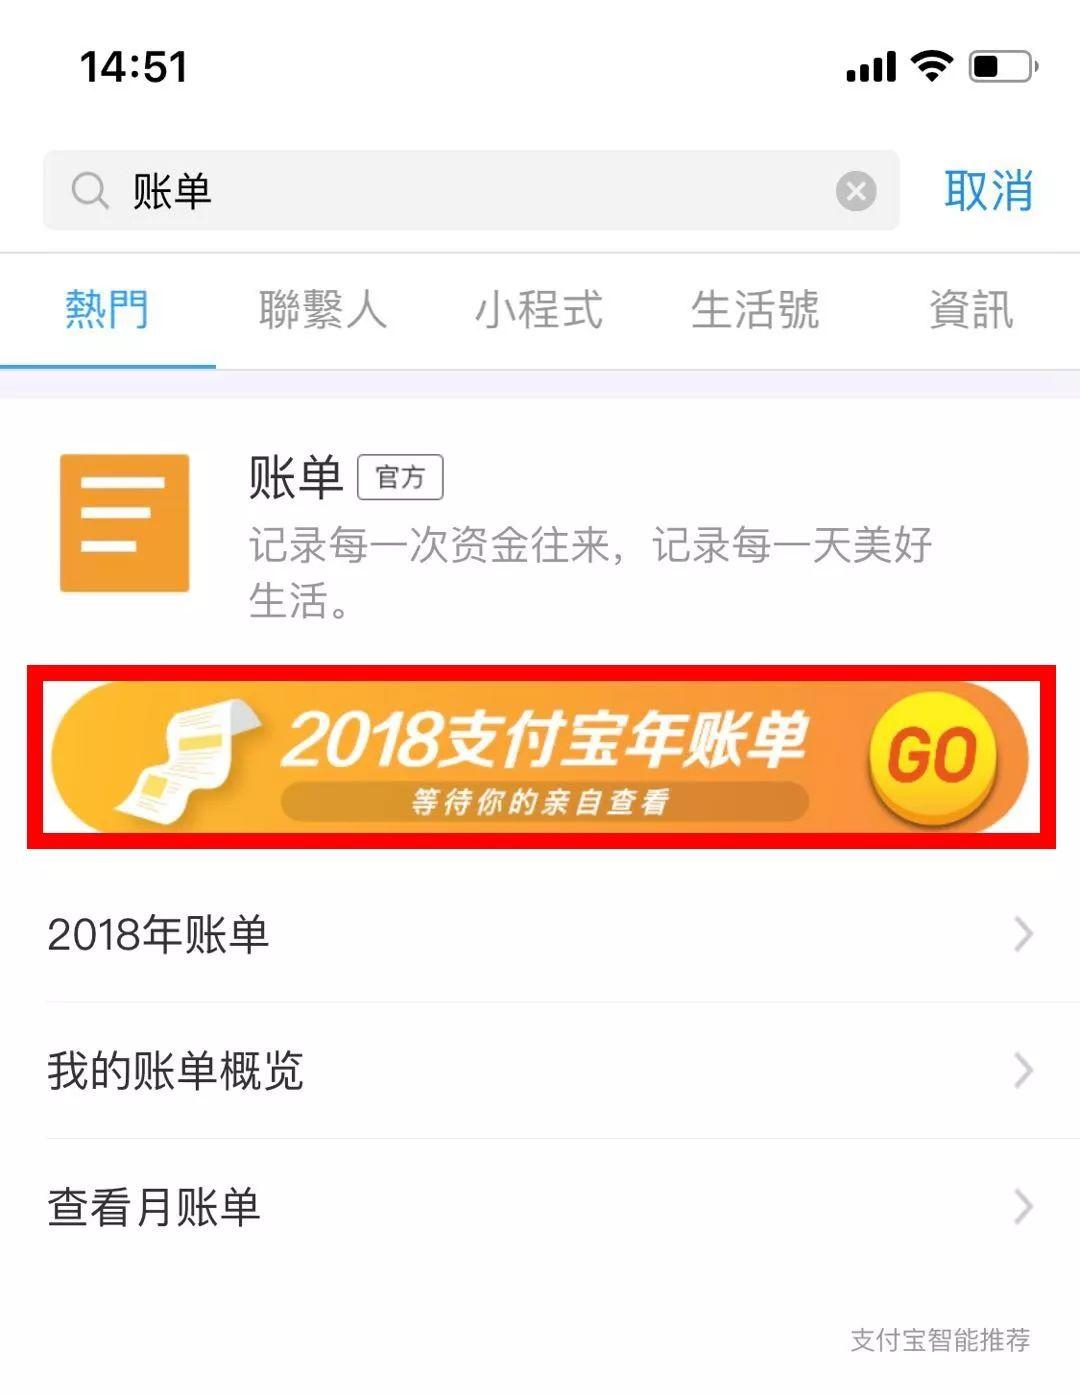 Have You Checked Your Alipay Annual Bill?